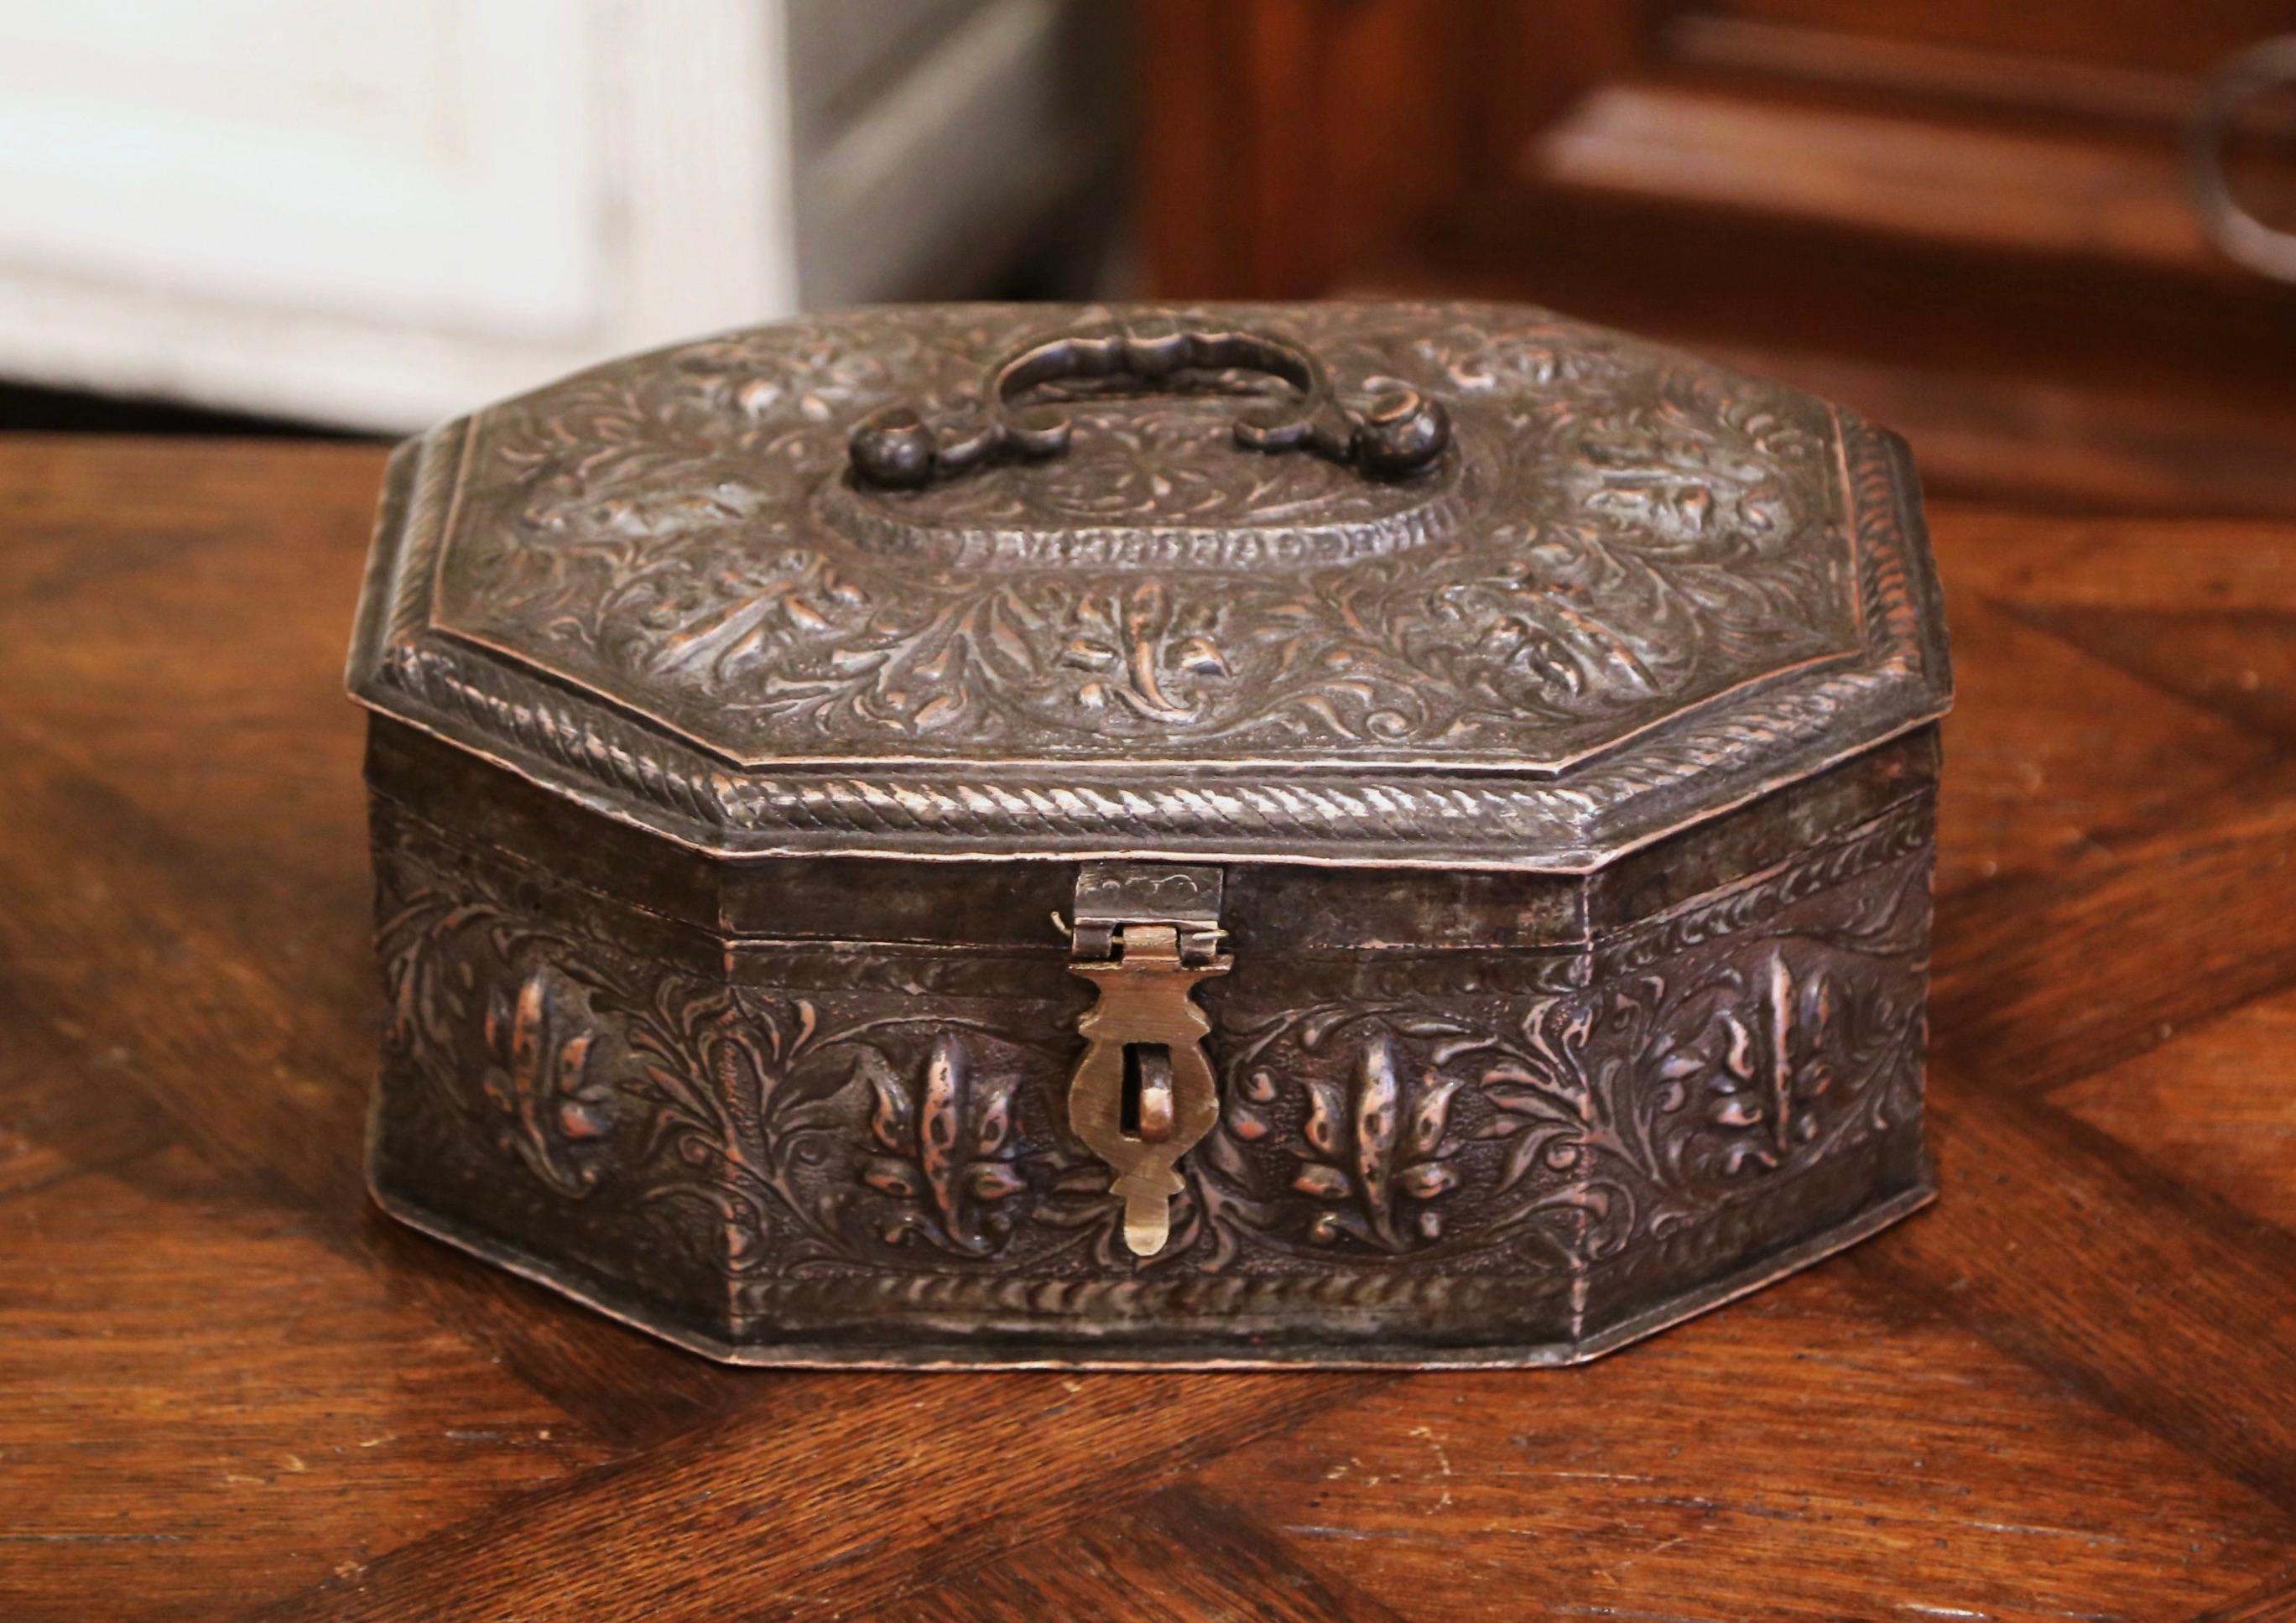 Crafted in southern France circa 1860, and octagonal in shape, the antique box is built of metal with a silvered finish with repousse floral and leaf motifs throughout. The decorative casket with decorative handle, features five inside compartments